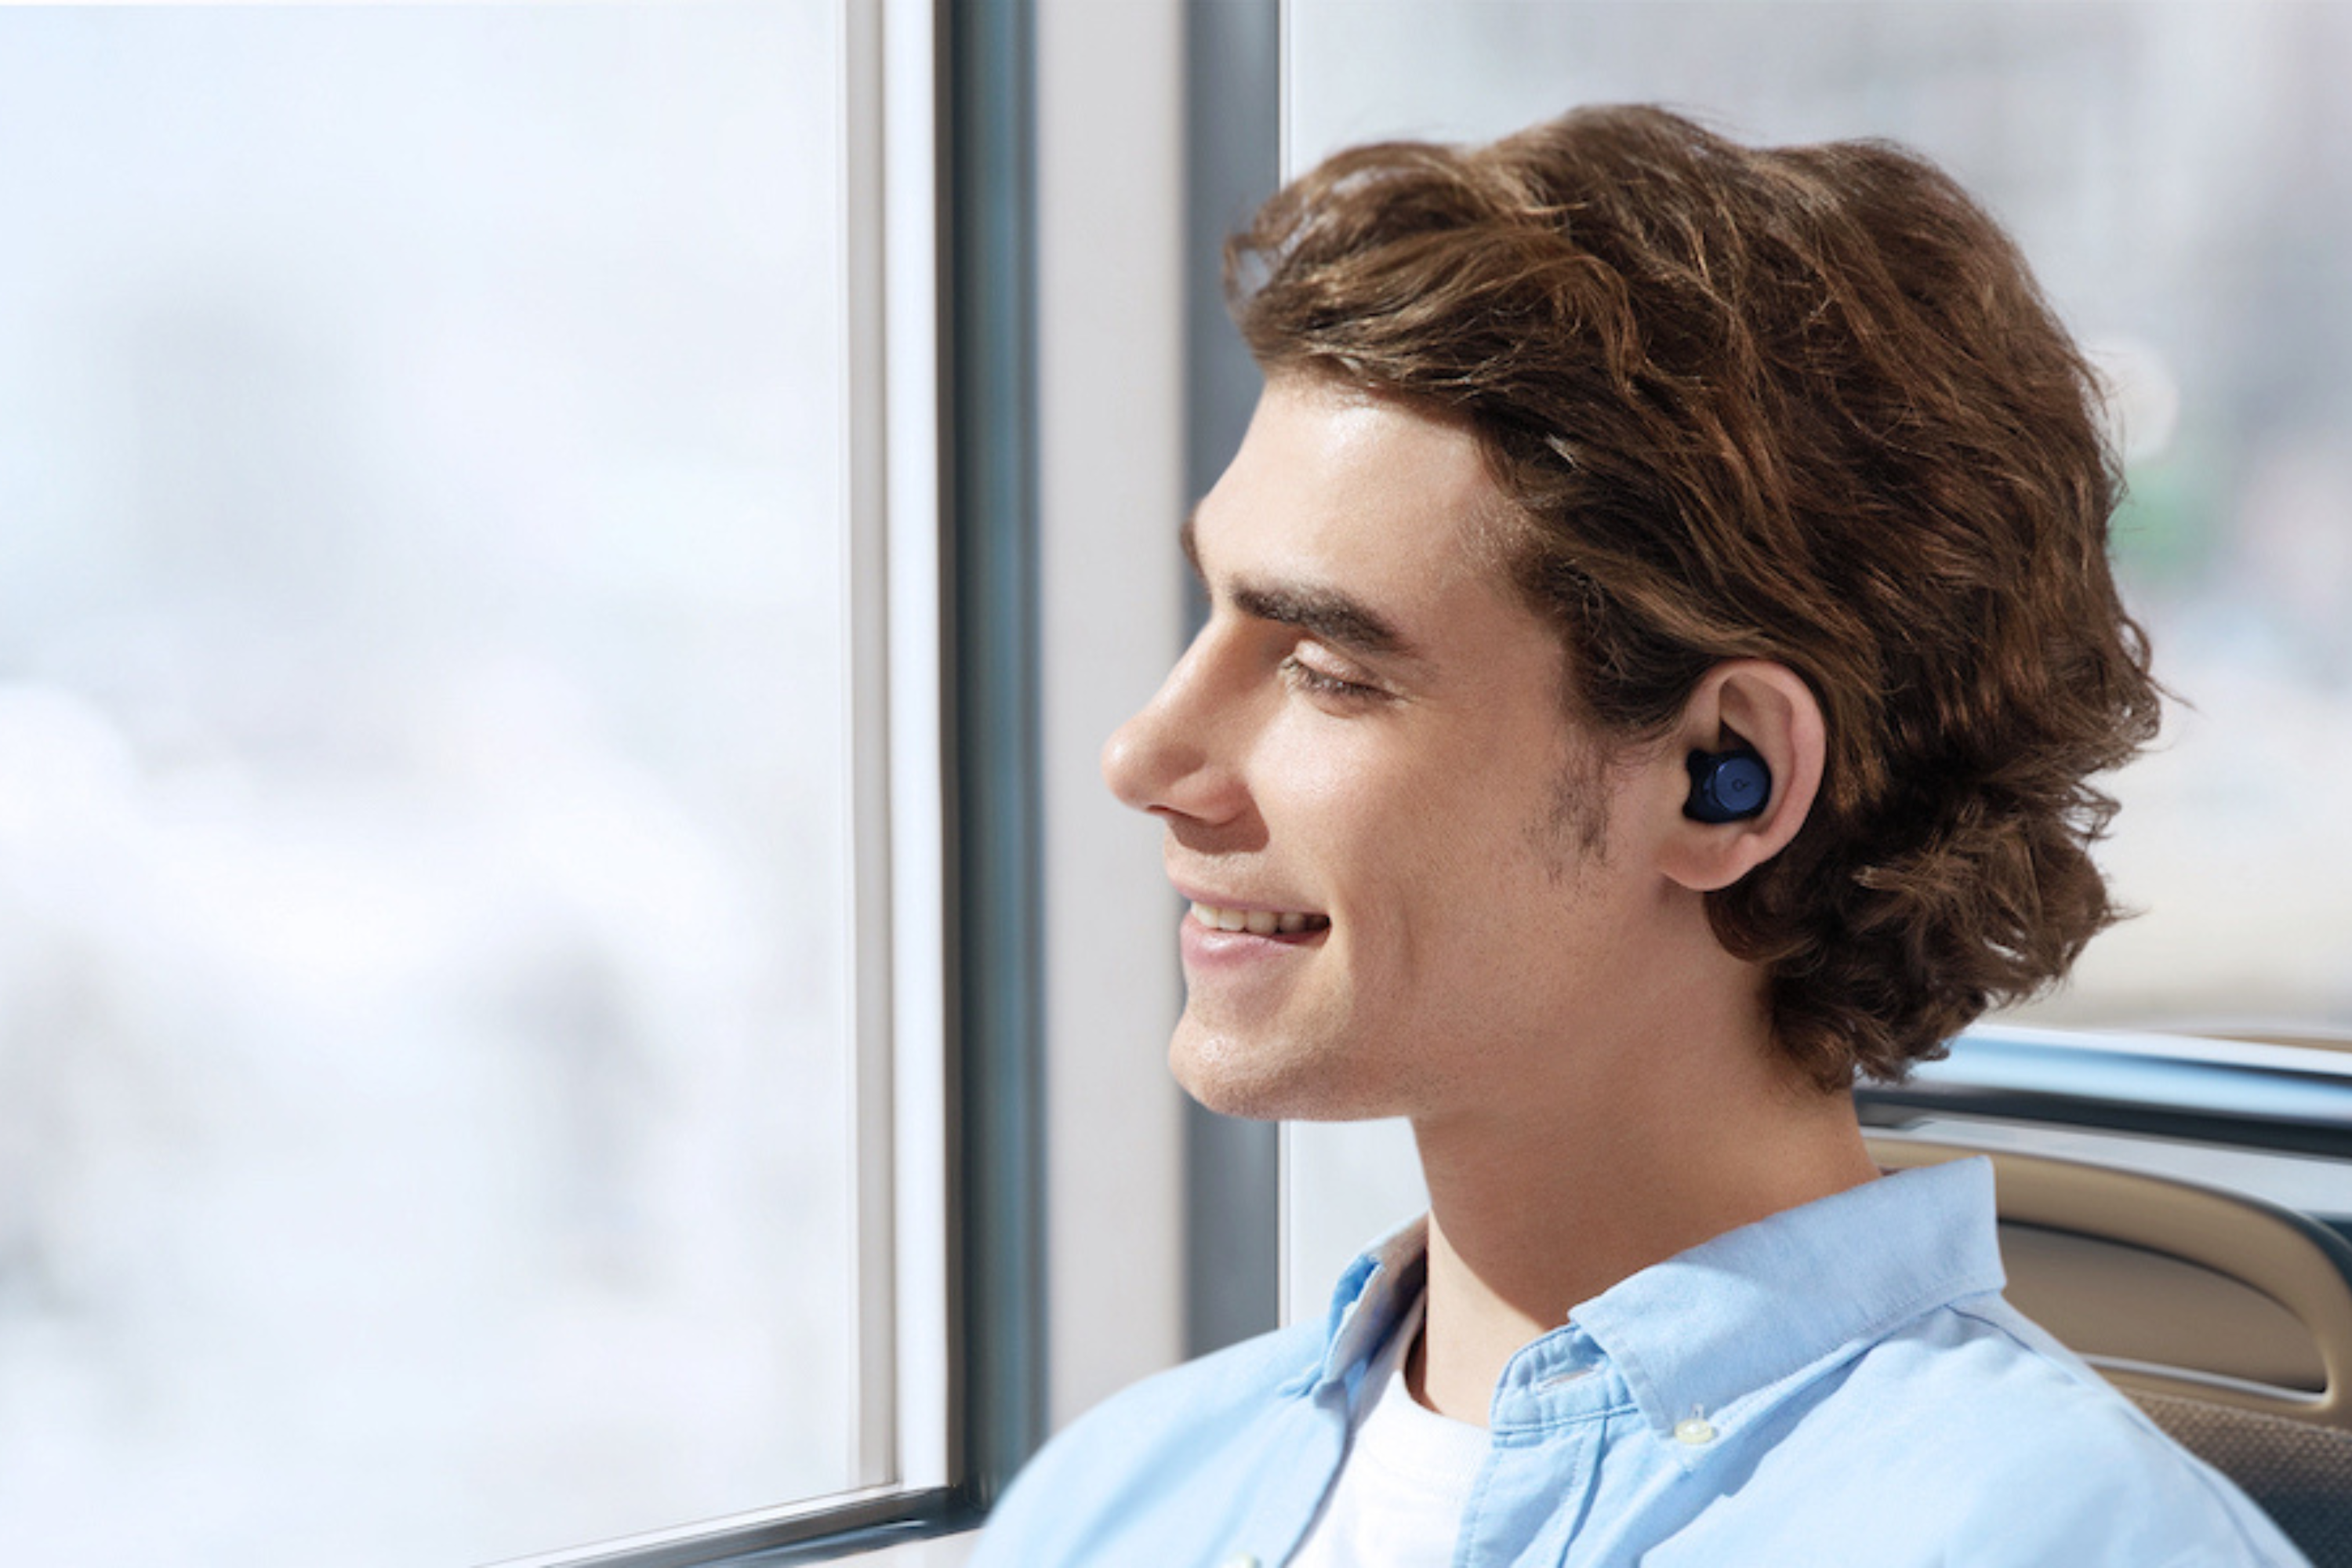  Anker Space A40 earbuds in person's ear